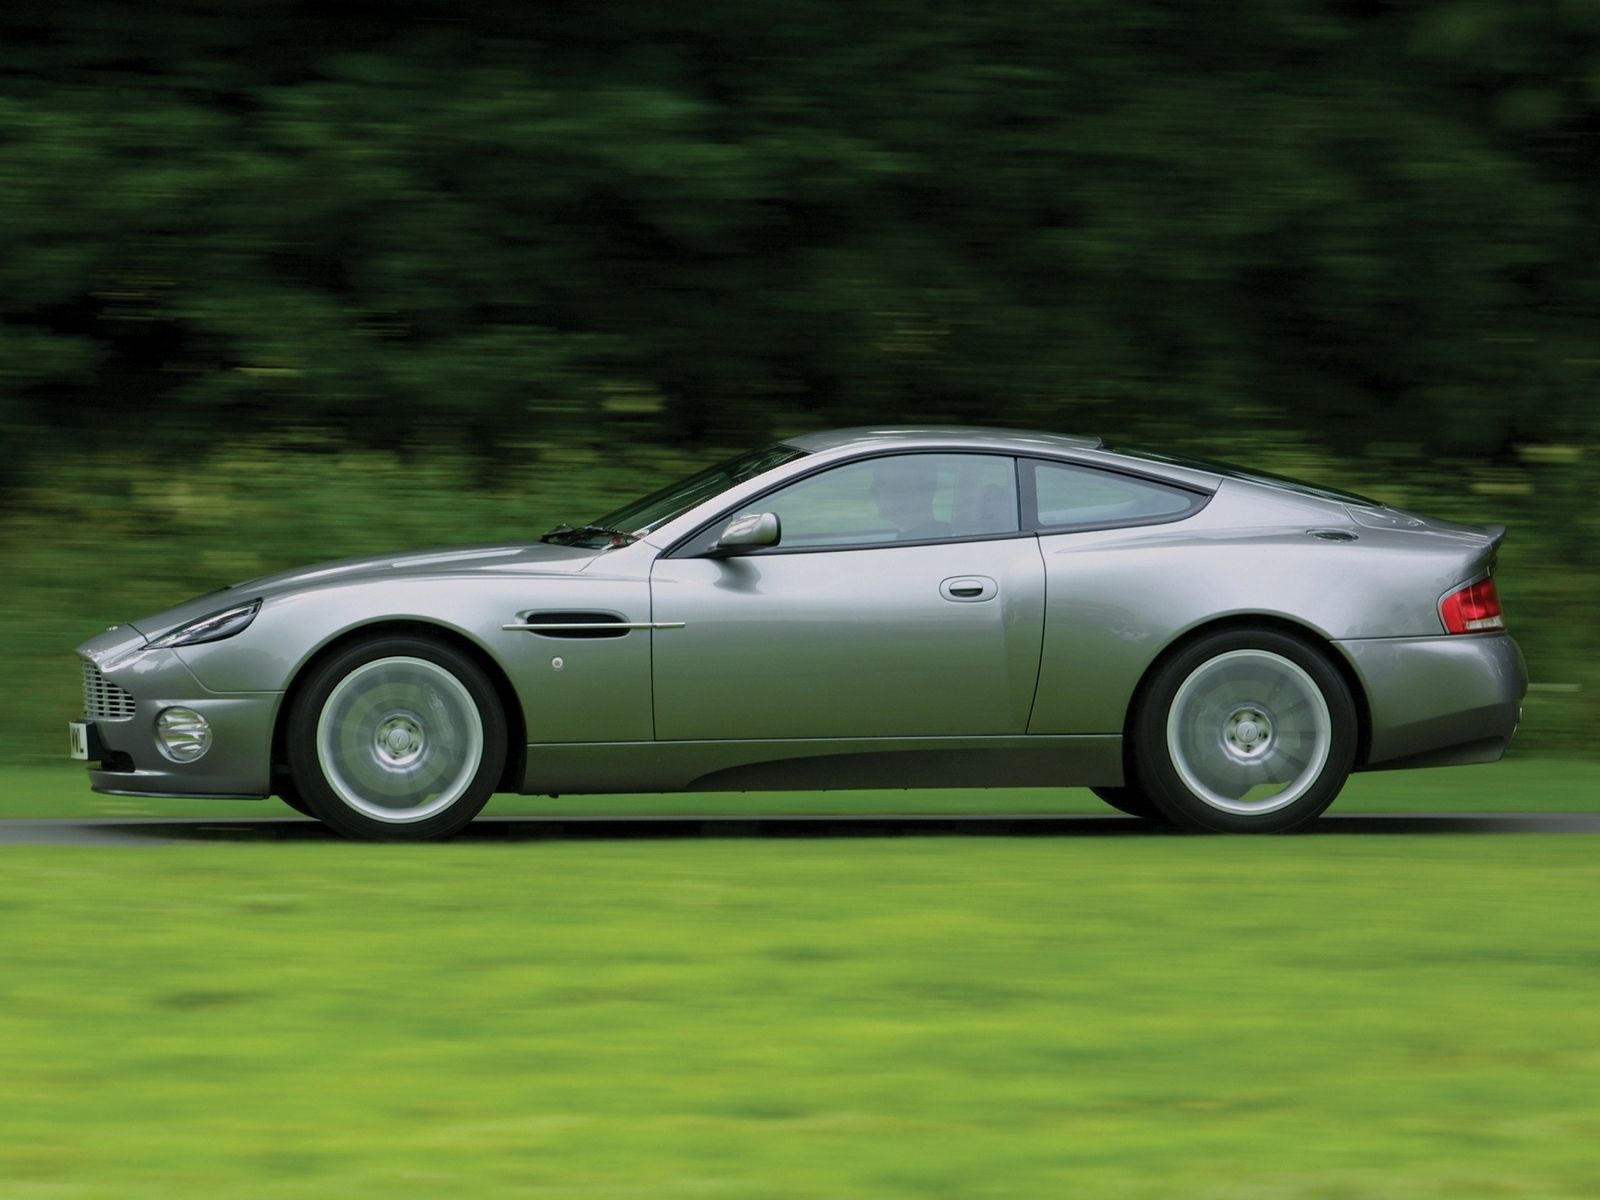 nature, vanquish, aston martin, cars, grey, side view, style, v12, 2001